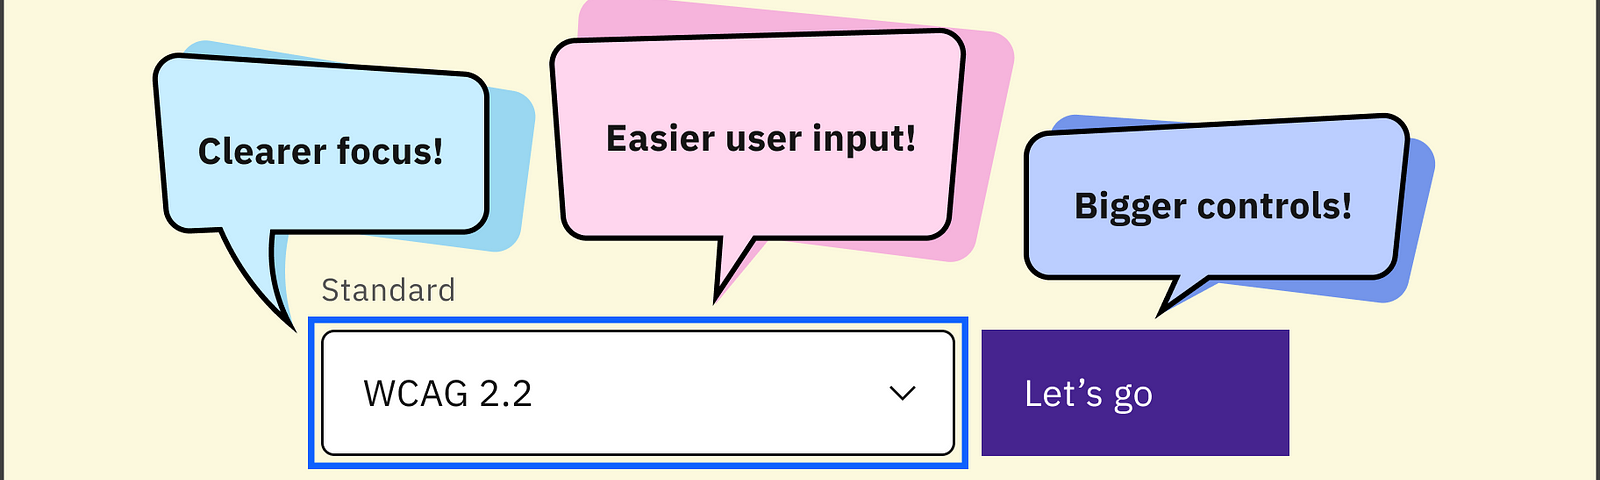 A drop-down labelled ‘Standard’ with WCAG 2.2 selected, a Let’s go button, and callouts reading ‘Clearer focus!’, ‘Easier user input!’, ‘Bigger controls!’, ‘And more!’